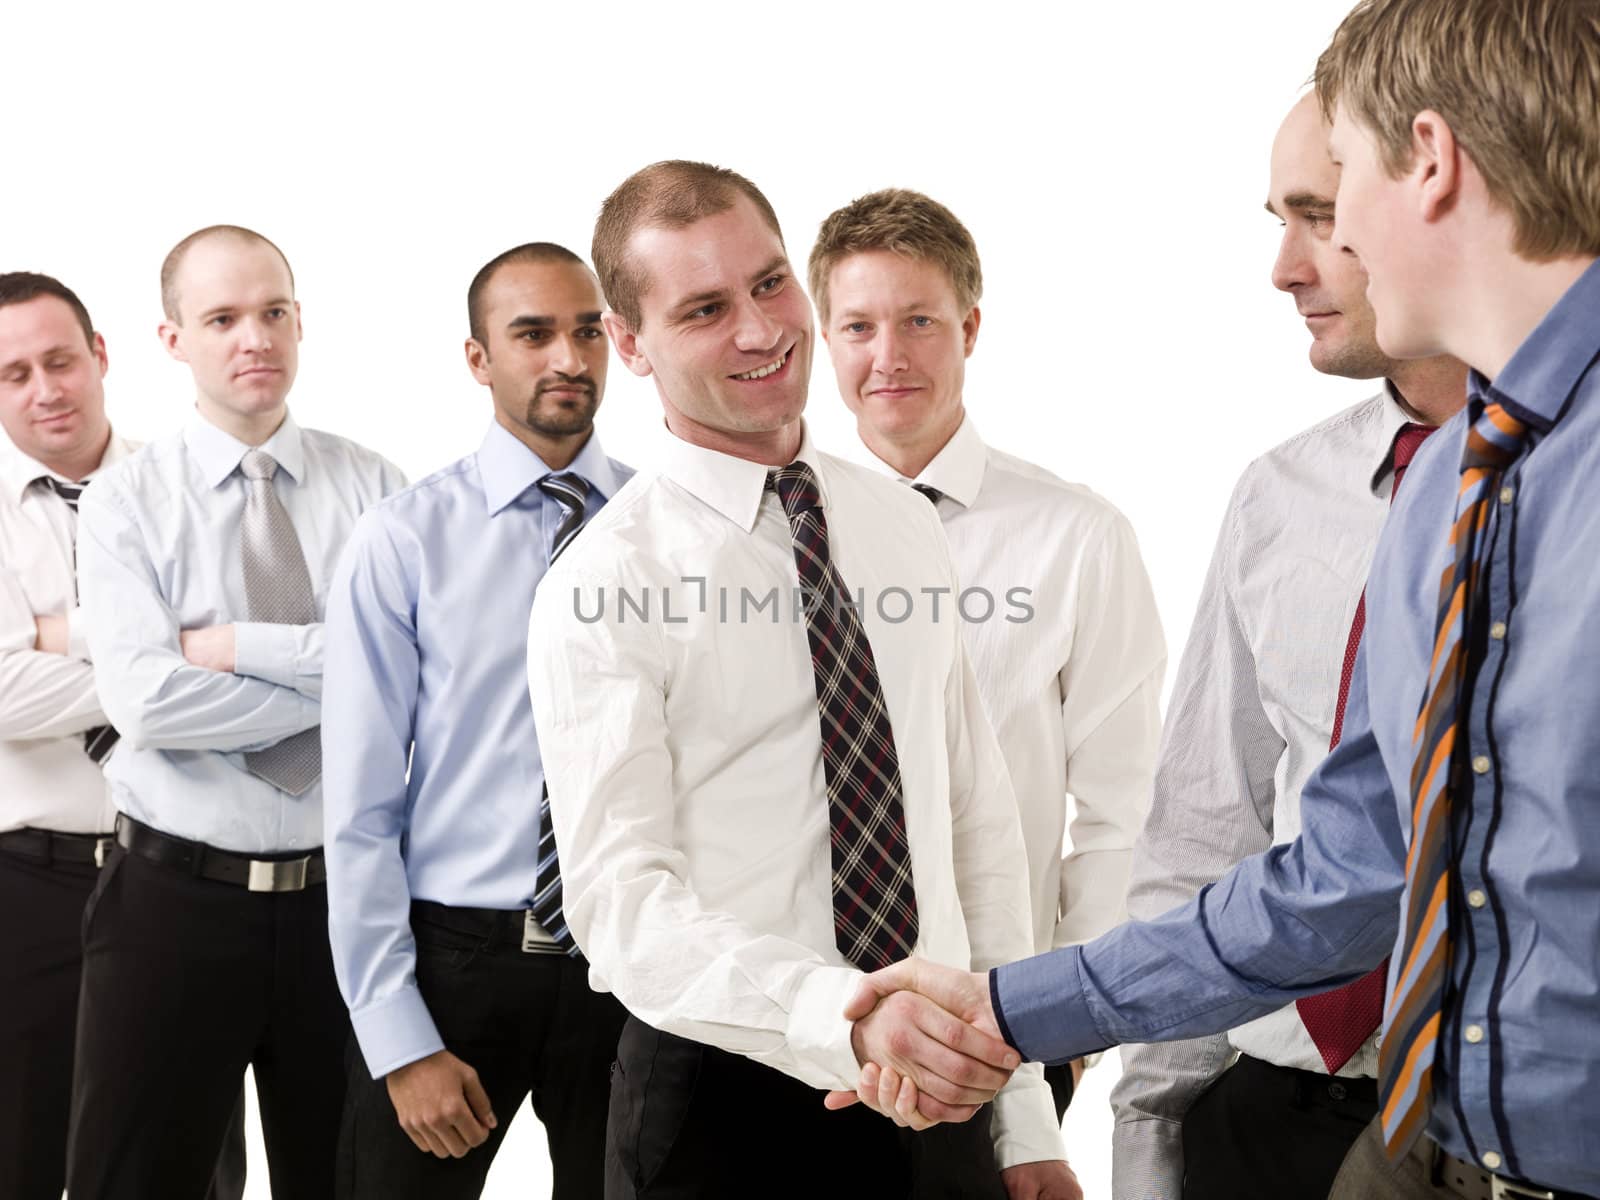 Businesspeople shaking hands by gemenacom